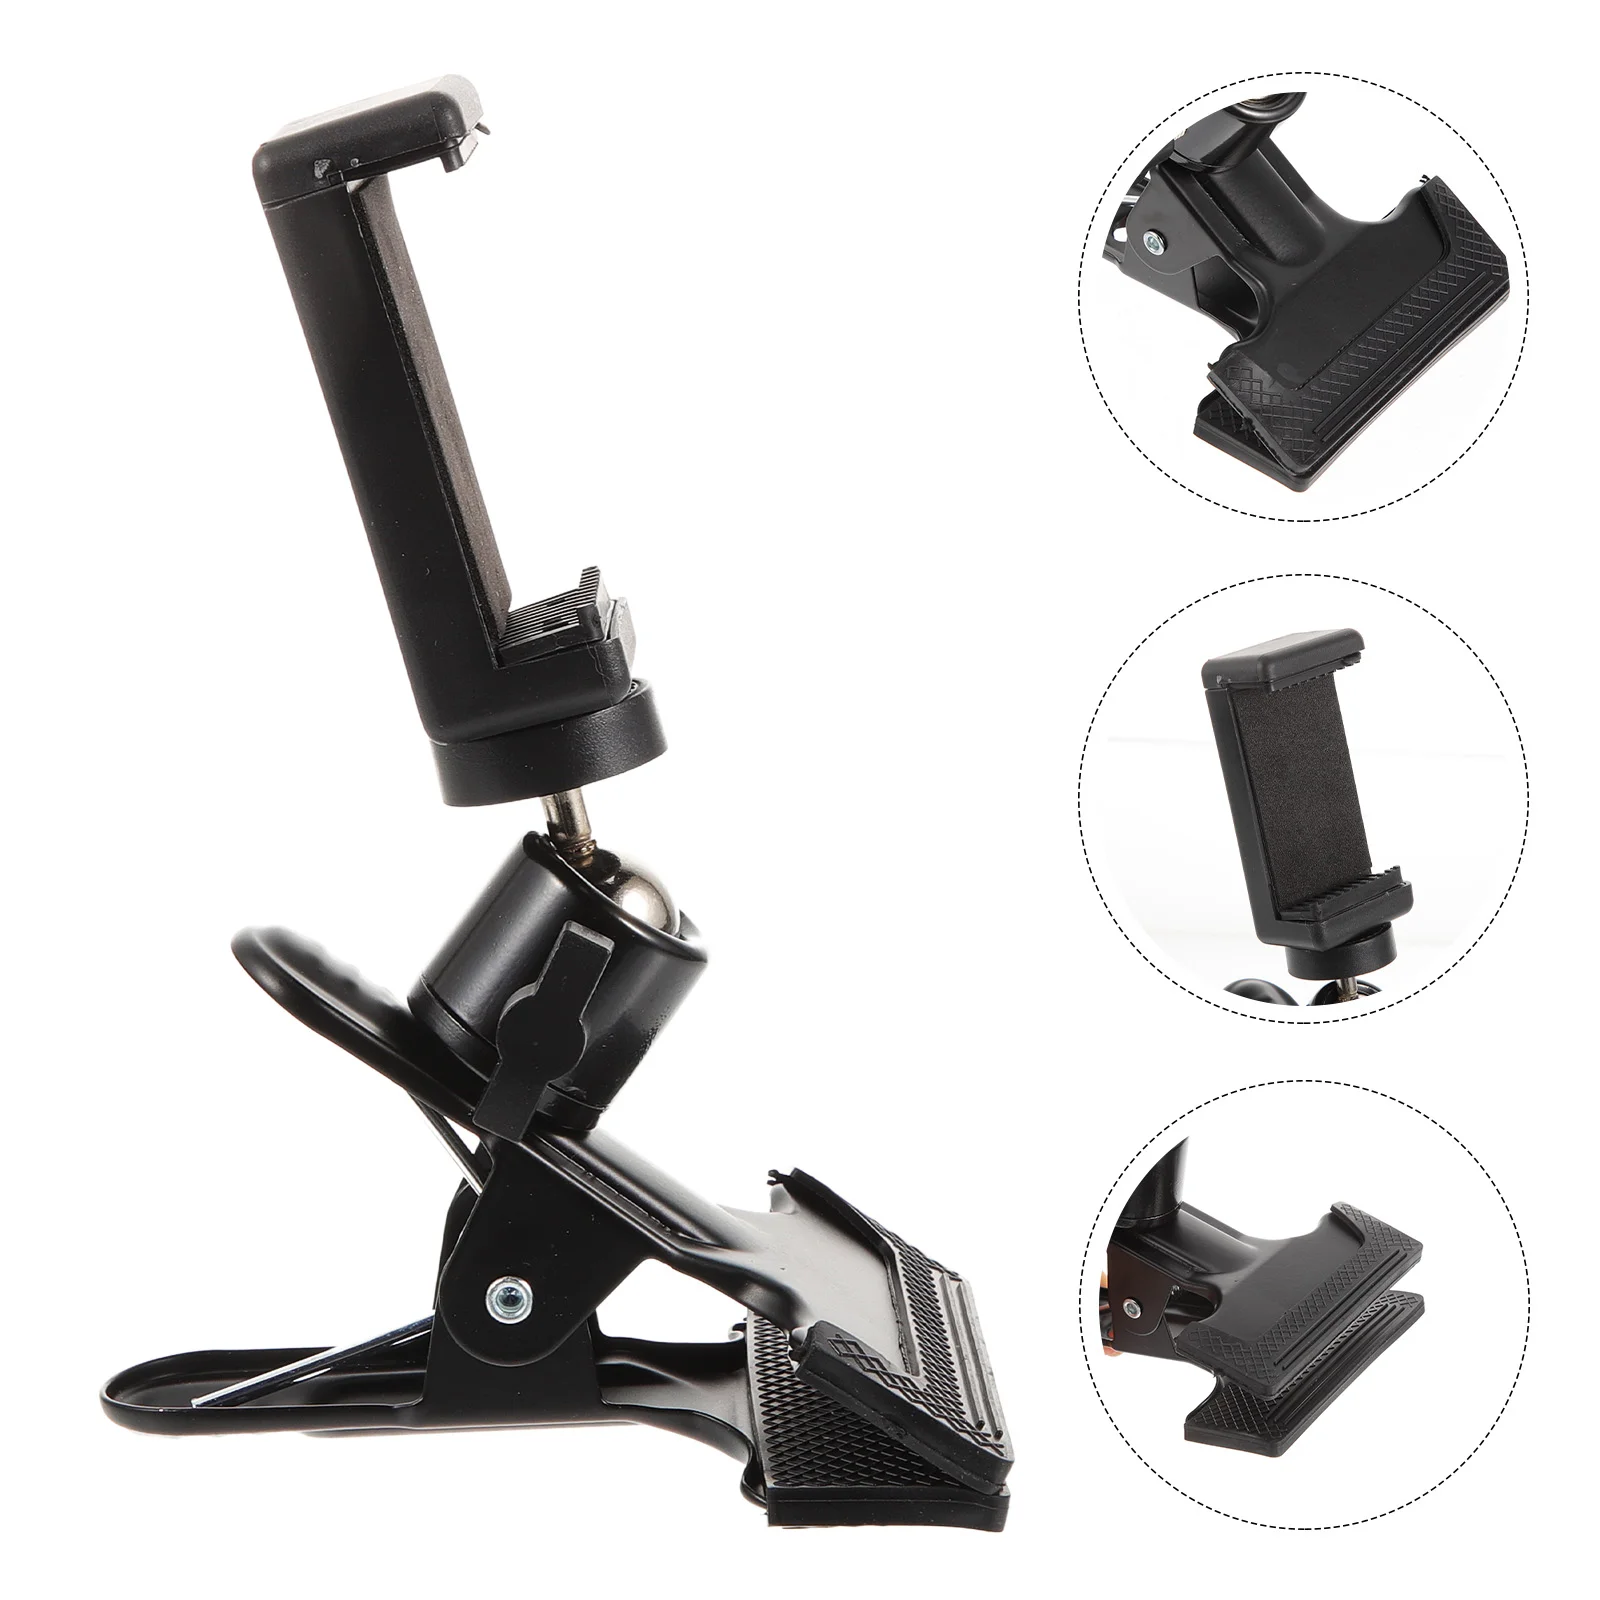 Bass Broadcast Clip Rotating Stand Guitar Bracket Instrument Part Mobile Holder Accessories Head Live enlarge